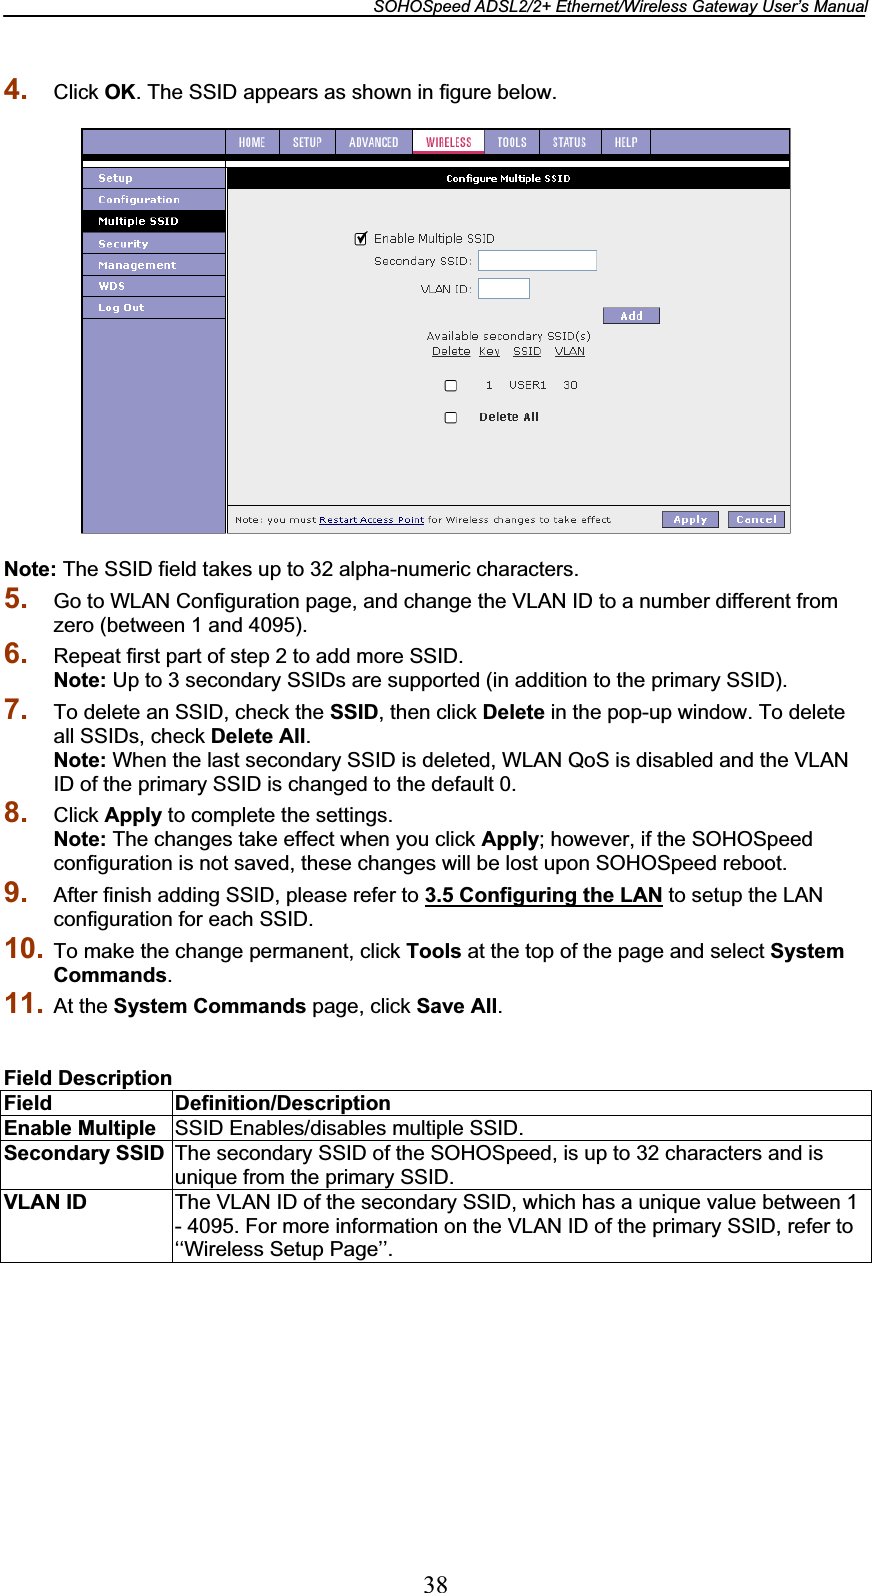 SOHOSpeed ADSL2/2+ Ethernet/Wireless Gateway User’s Manual 384. Click OK. The SSID appears as shown in figure below. Note: The SSID field takes up to 32 alpha-numeric characters. 5. Go to WLAN Configuration page, and change the VLAN ID to a number different from zero (between 1 and 4095). 6. Repeat first part of step 2 to add more SSID. Note: Up to 3 secondary SSIDs are supported (in addition to the primary SSID). 7. To delete an SSID, check the SSID, then click Delete in the pop-up window. To delete all SSIDs, check Delete All.Note: When the last secondary SSID is deleted, WLAN QoS is disabled and the VLAN ID of the primary SSID is changed to the default 0. 8. Click Apply to complete the settings. Note: The changes take effect when you click Apply; however, if the SOHOSpeed configuration is not saved, these changes will be lost upon SOHOSpeed reboot. 9. After finish adding SSID, please refer to 3.5 Configuring the LAN to setup the LAN configuration for each SSID. 10. To make the change permanent, click Tools at the top of the page and select System Commands.11. At the System Commands page, click Save All.Field Description Field Definition/Description Enable Multiple  SSID Enables/disables multiple SSID. Secondary SSID  The secondary SSID of the SOHOSpeed, is up to 32 characters and is unique from the primary SSID. VLAN ID  The VLAN ID of the secondary SSID, which has a unique value between 1 - 4095. For more information on the VLAN ID of the primary SSID, refer to ‘‘Wireless Setup Page’’. 